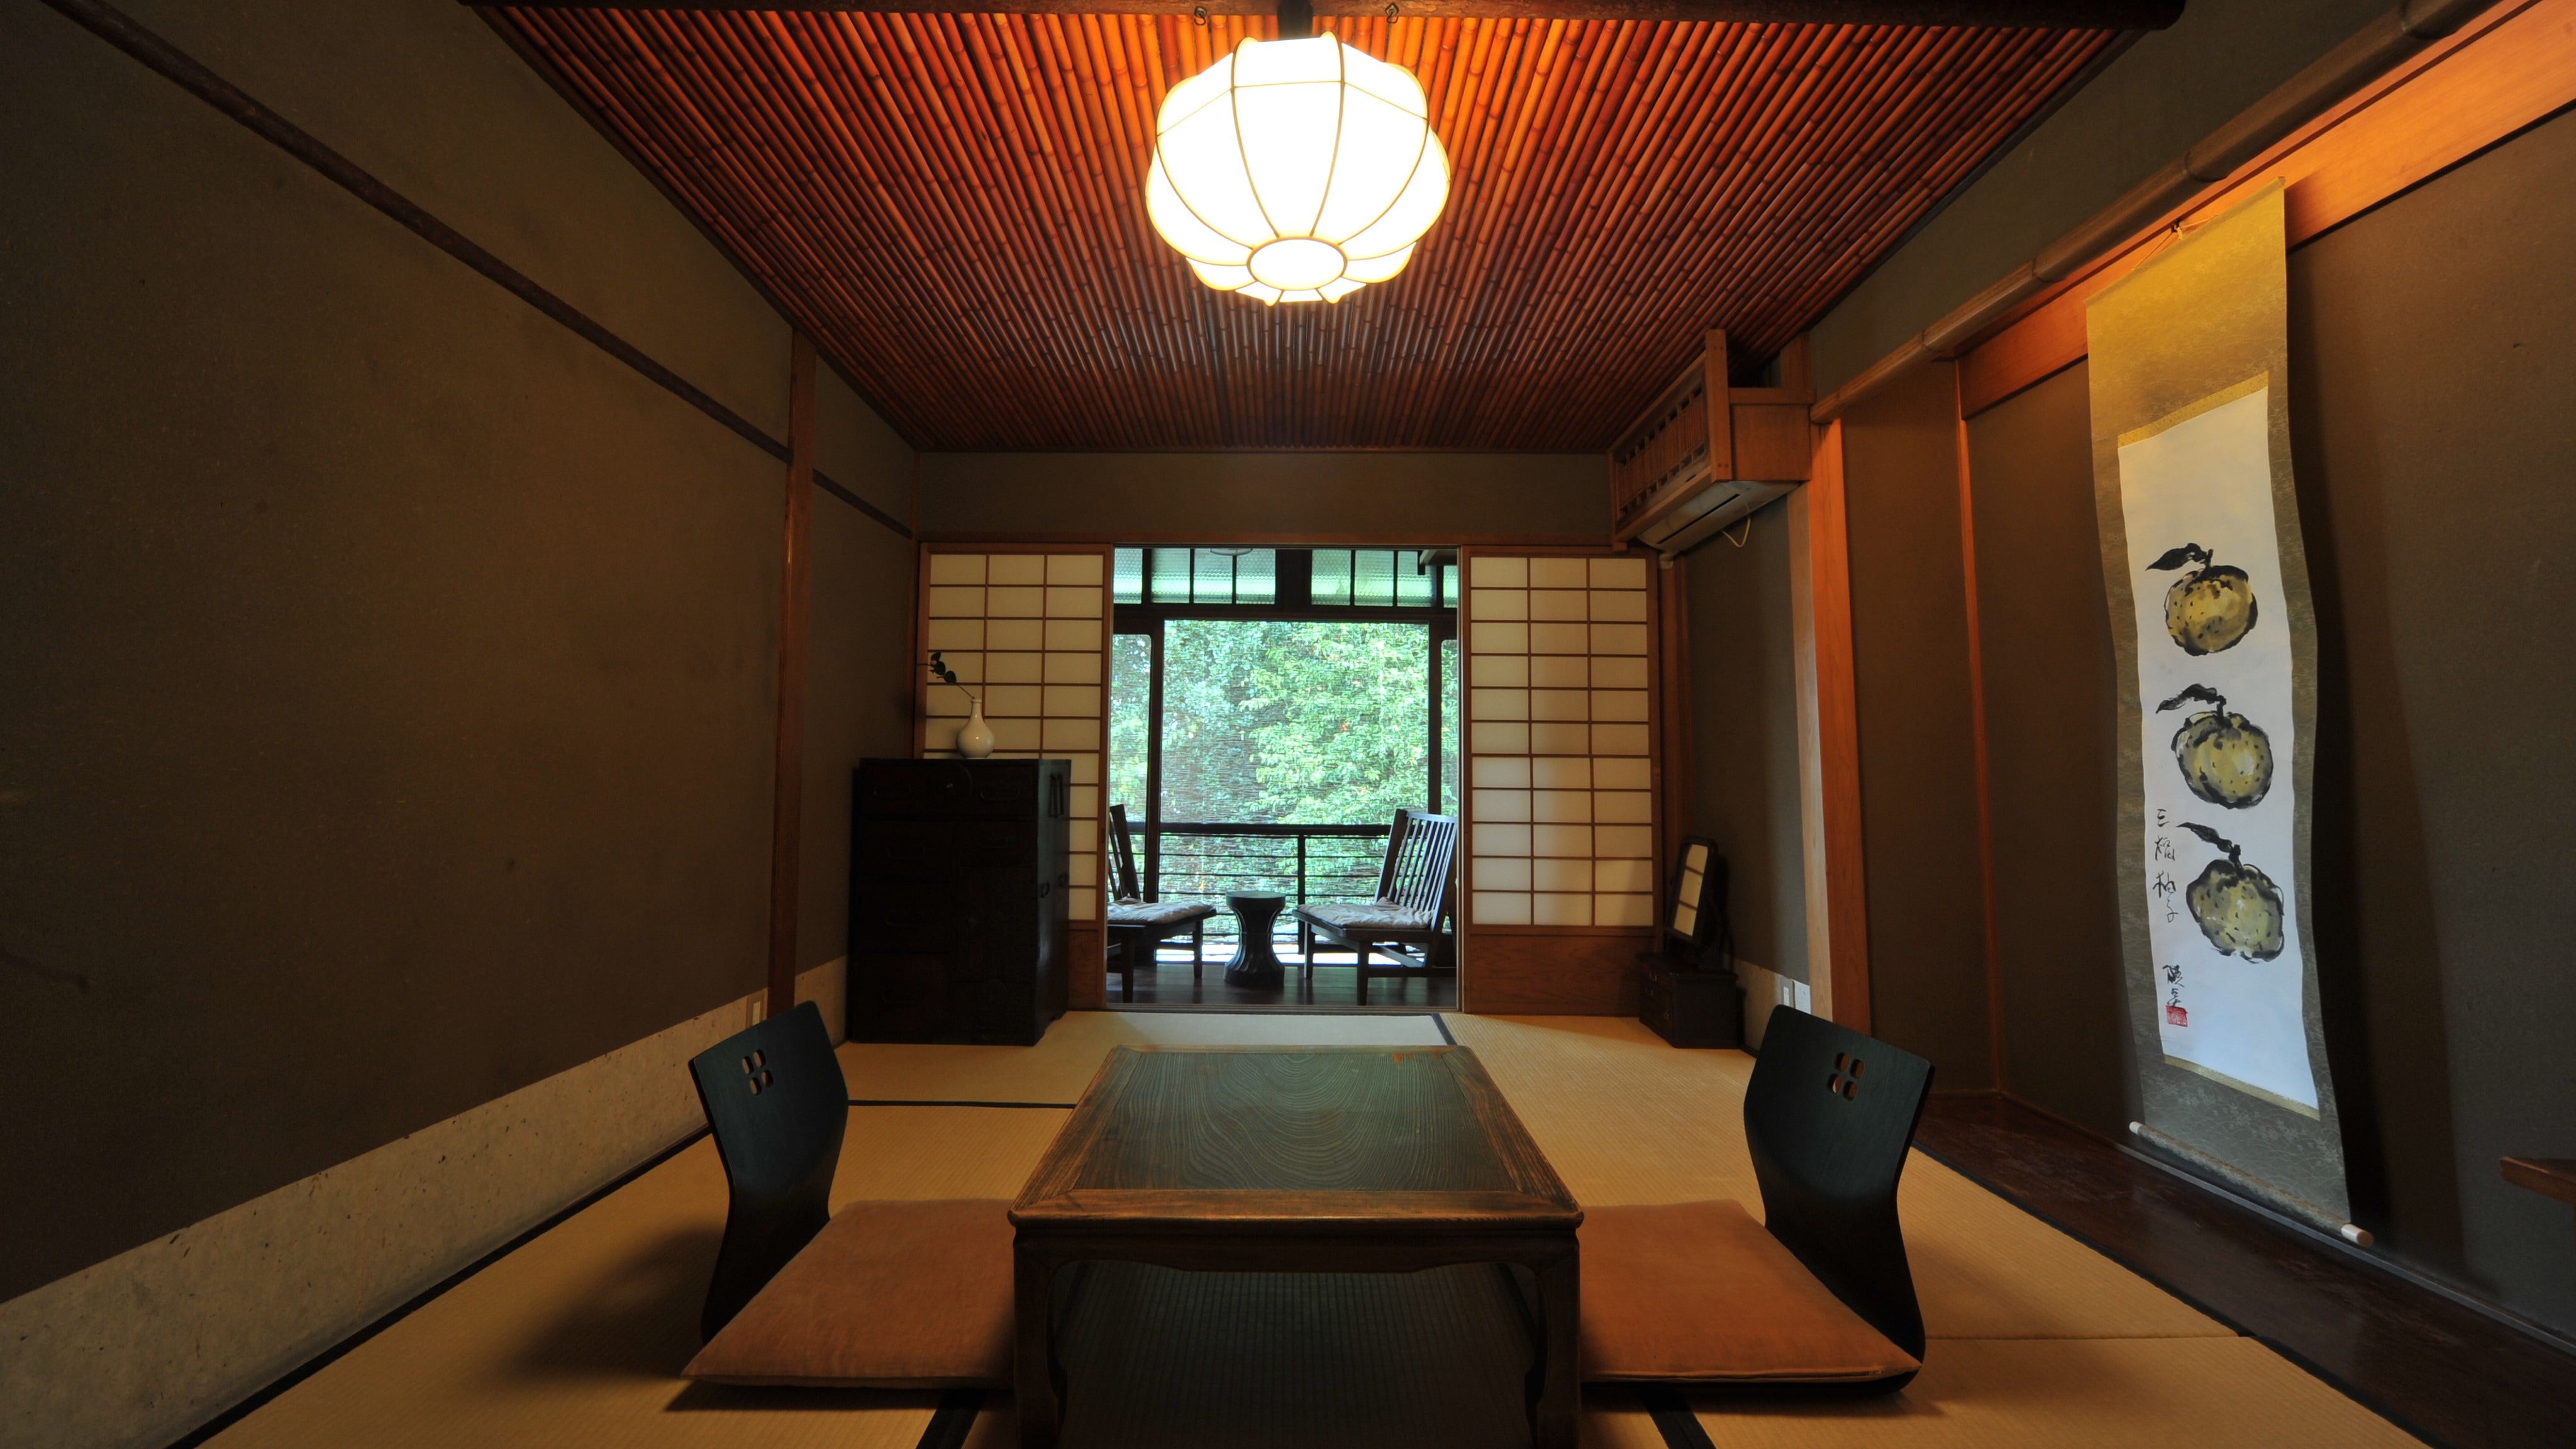 A small Japanese-style room with a veranda overlooking the streets of Gion [unit bath/toilet]) / green